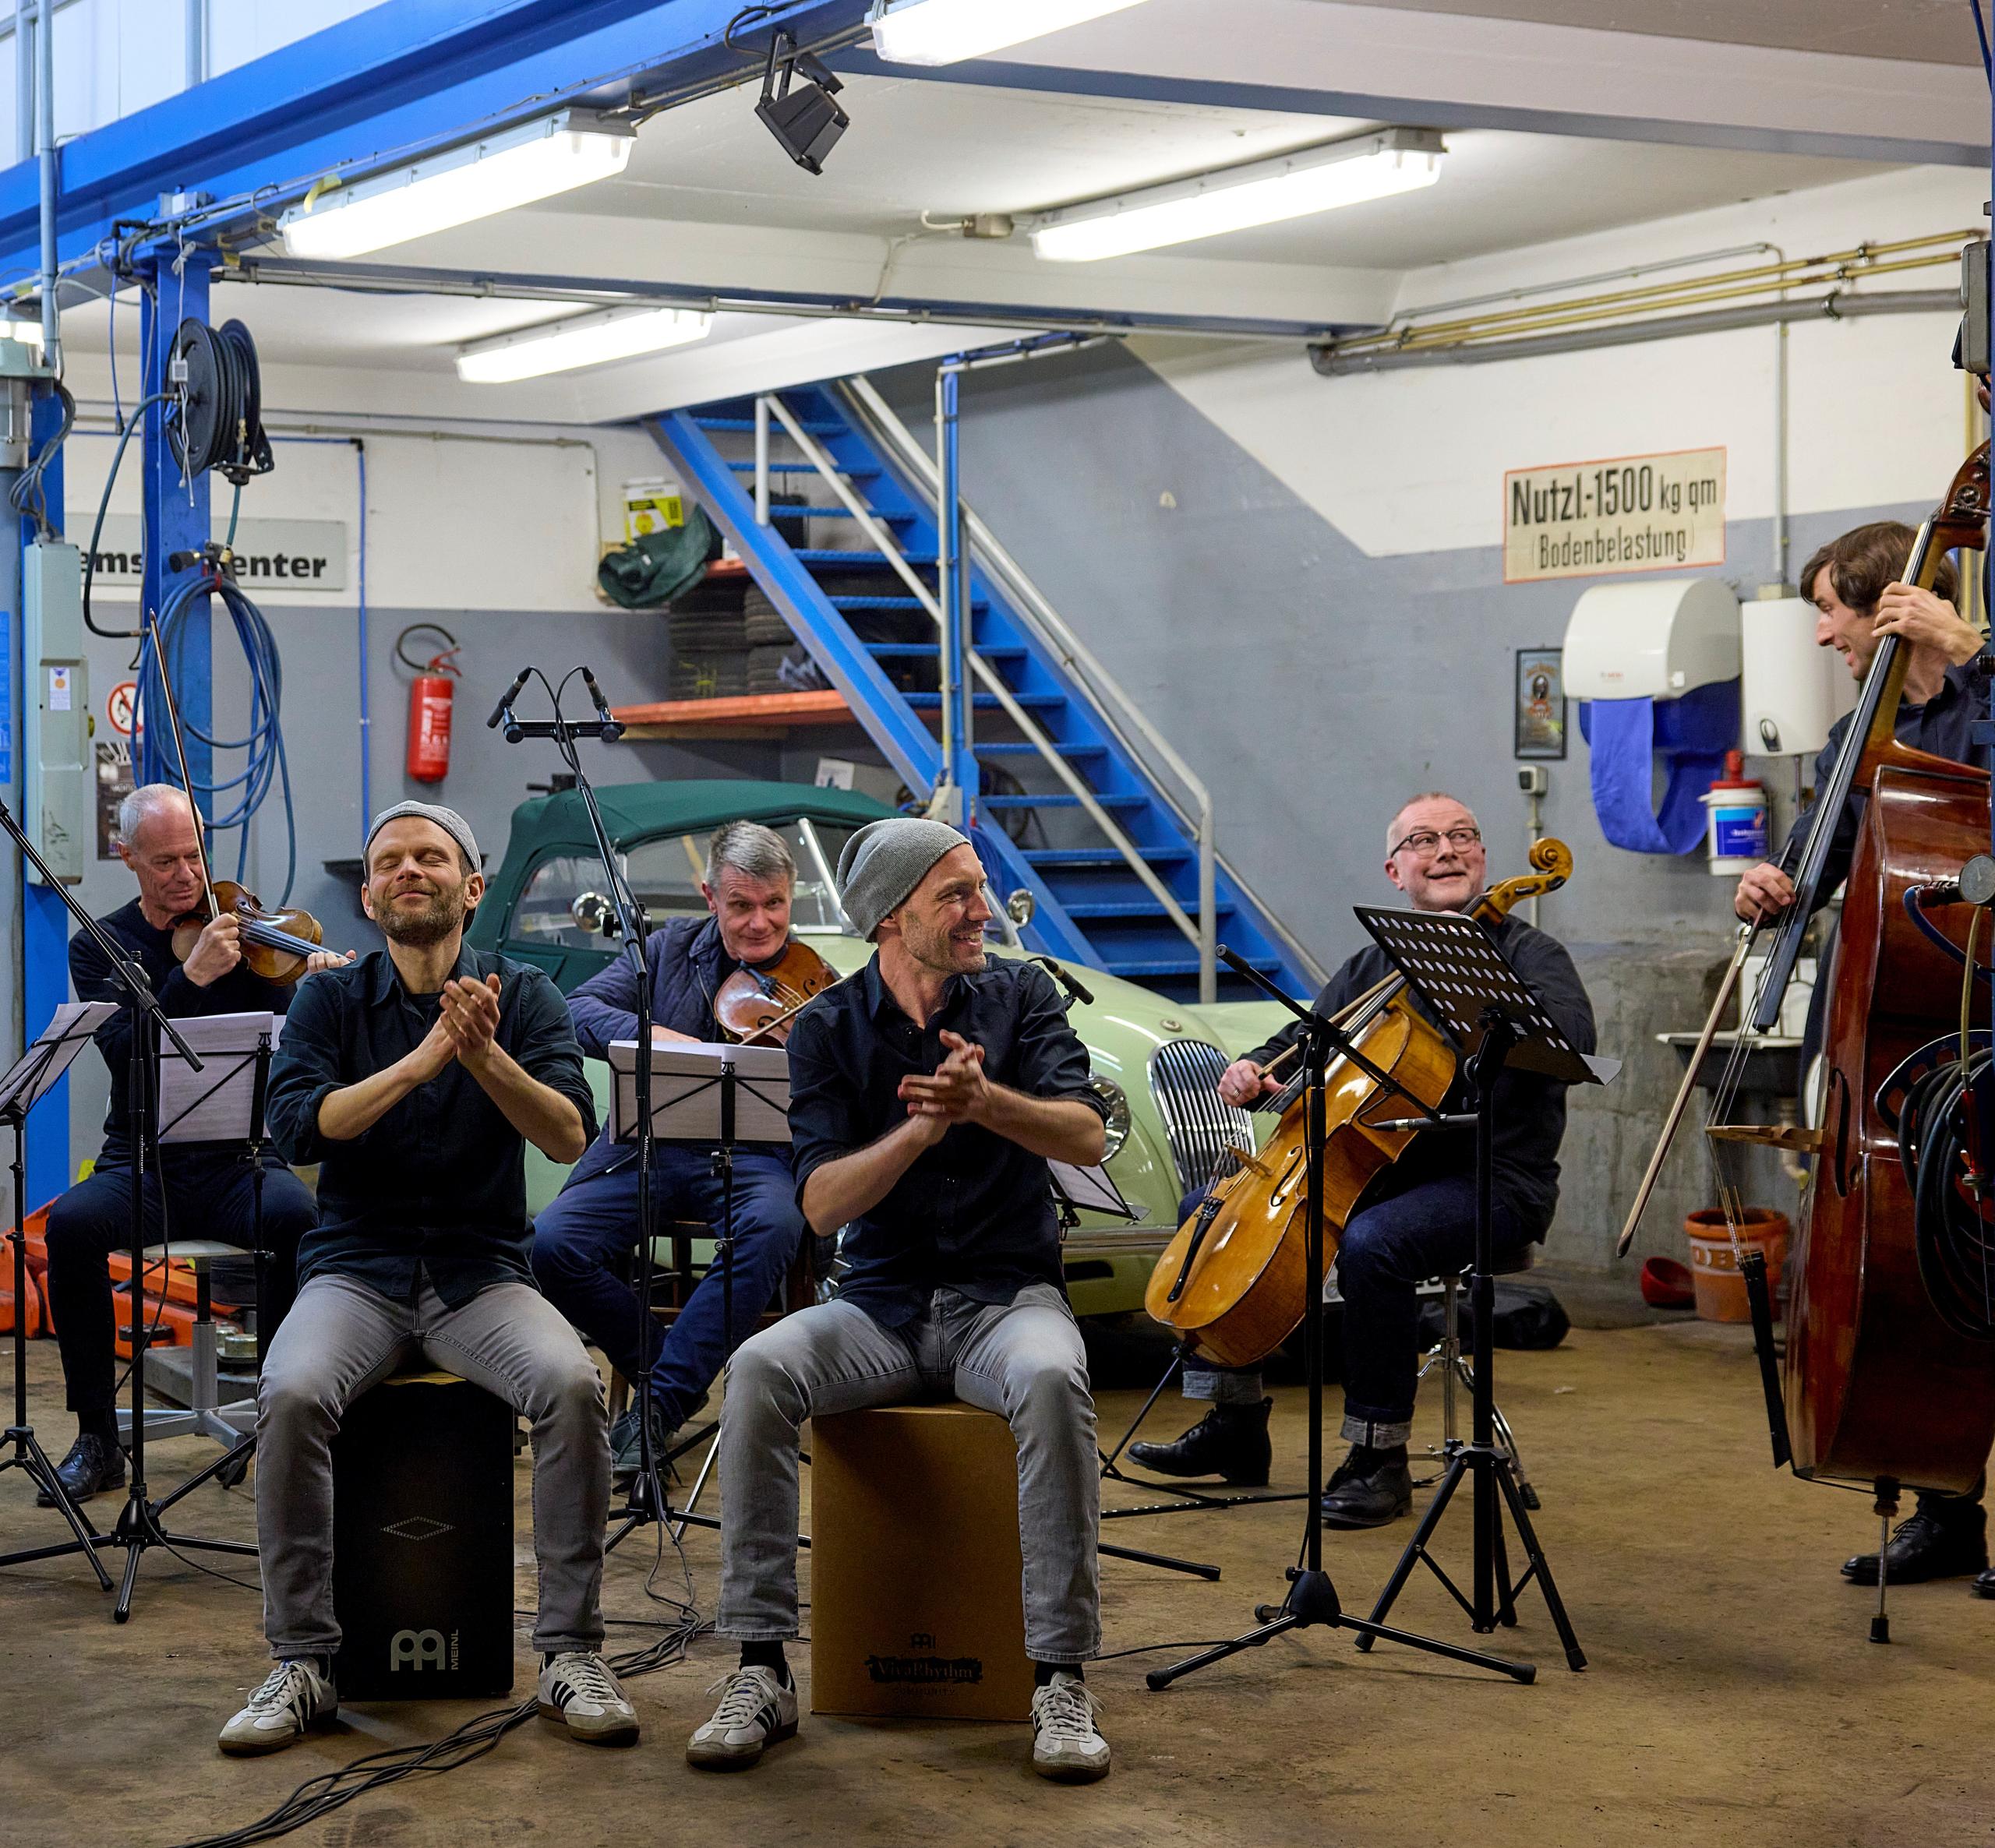 Classical musicians with two drummers in a car workshop